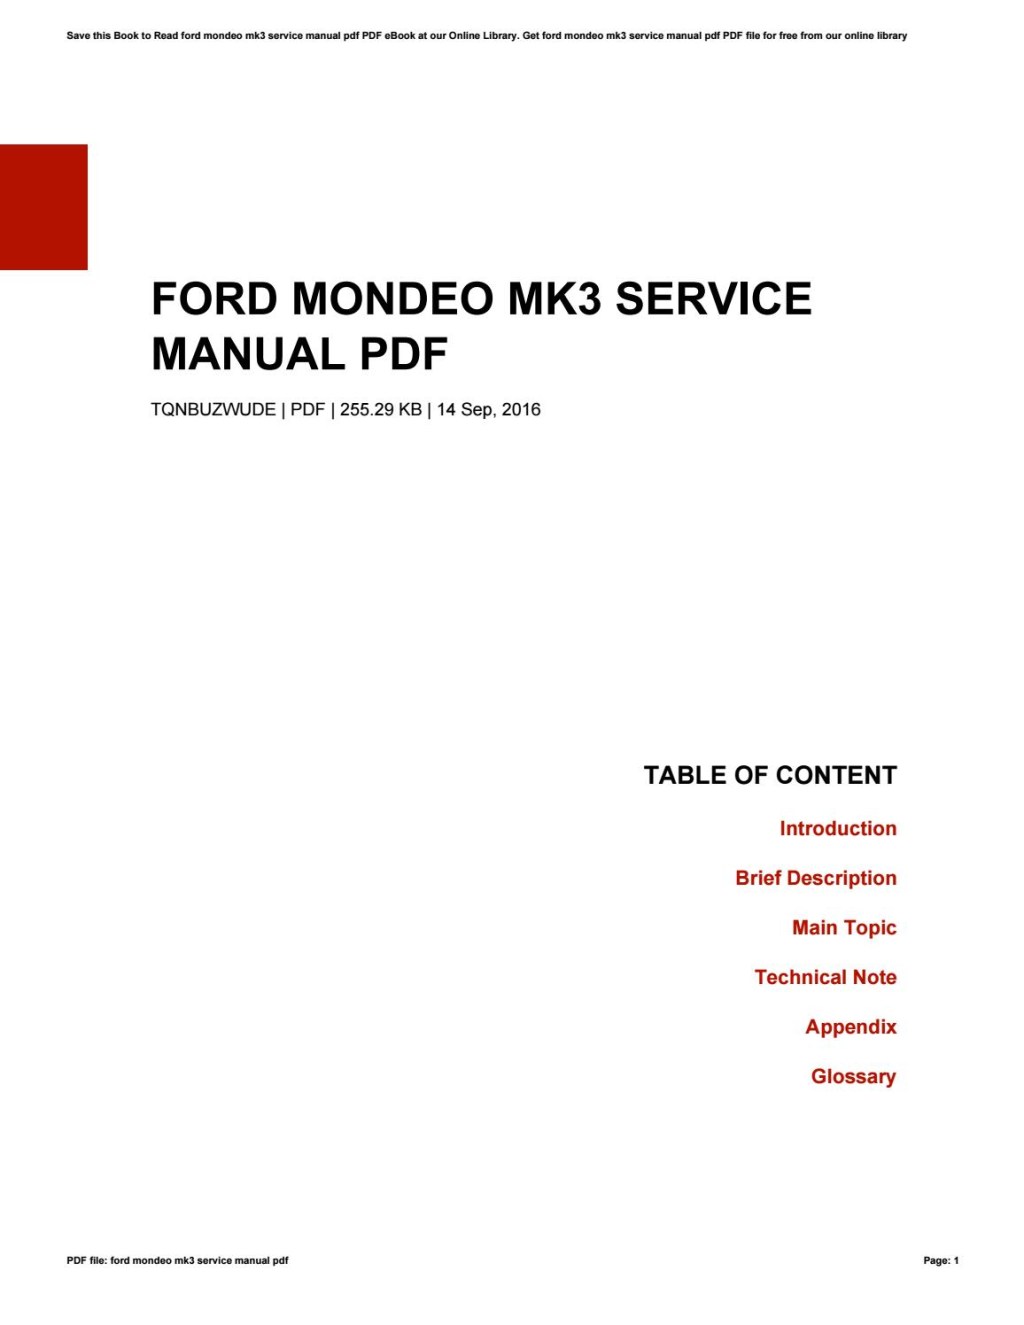 Picture of: Ford mondeo mk service manual pdf by harvard-ac-uk – Issuu